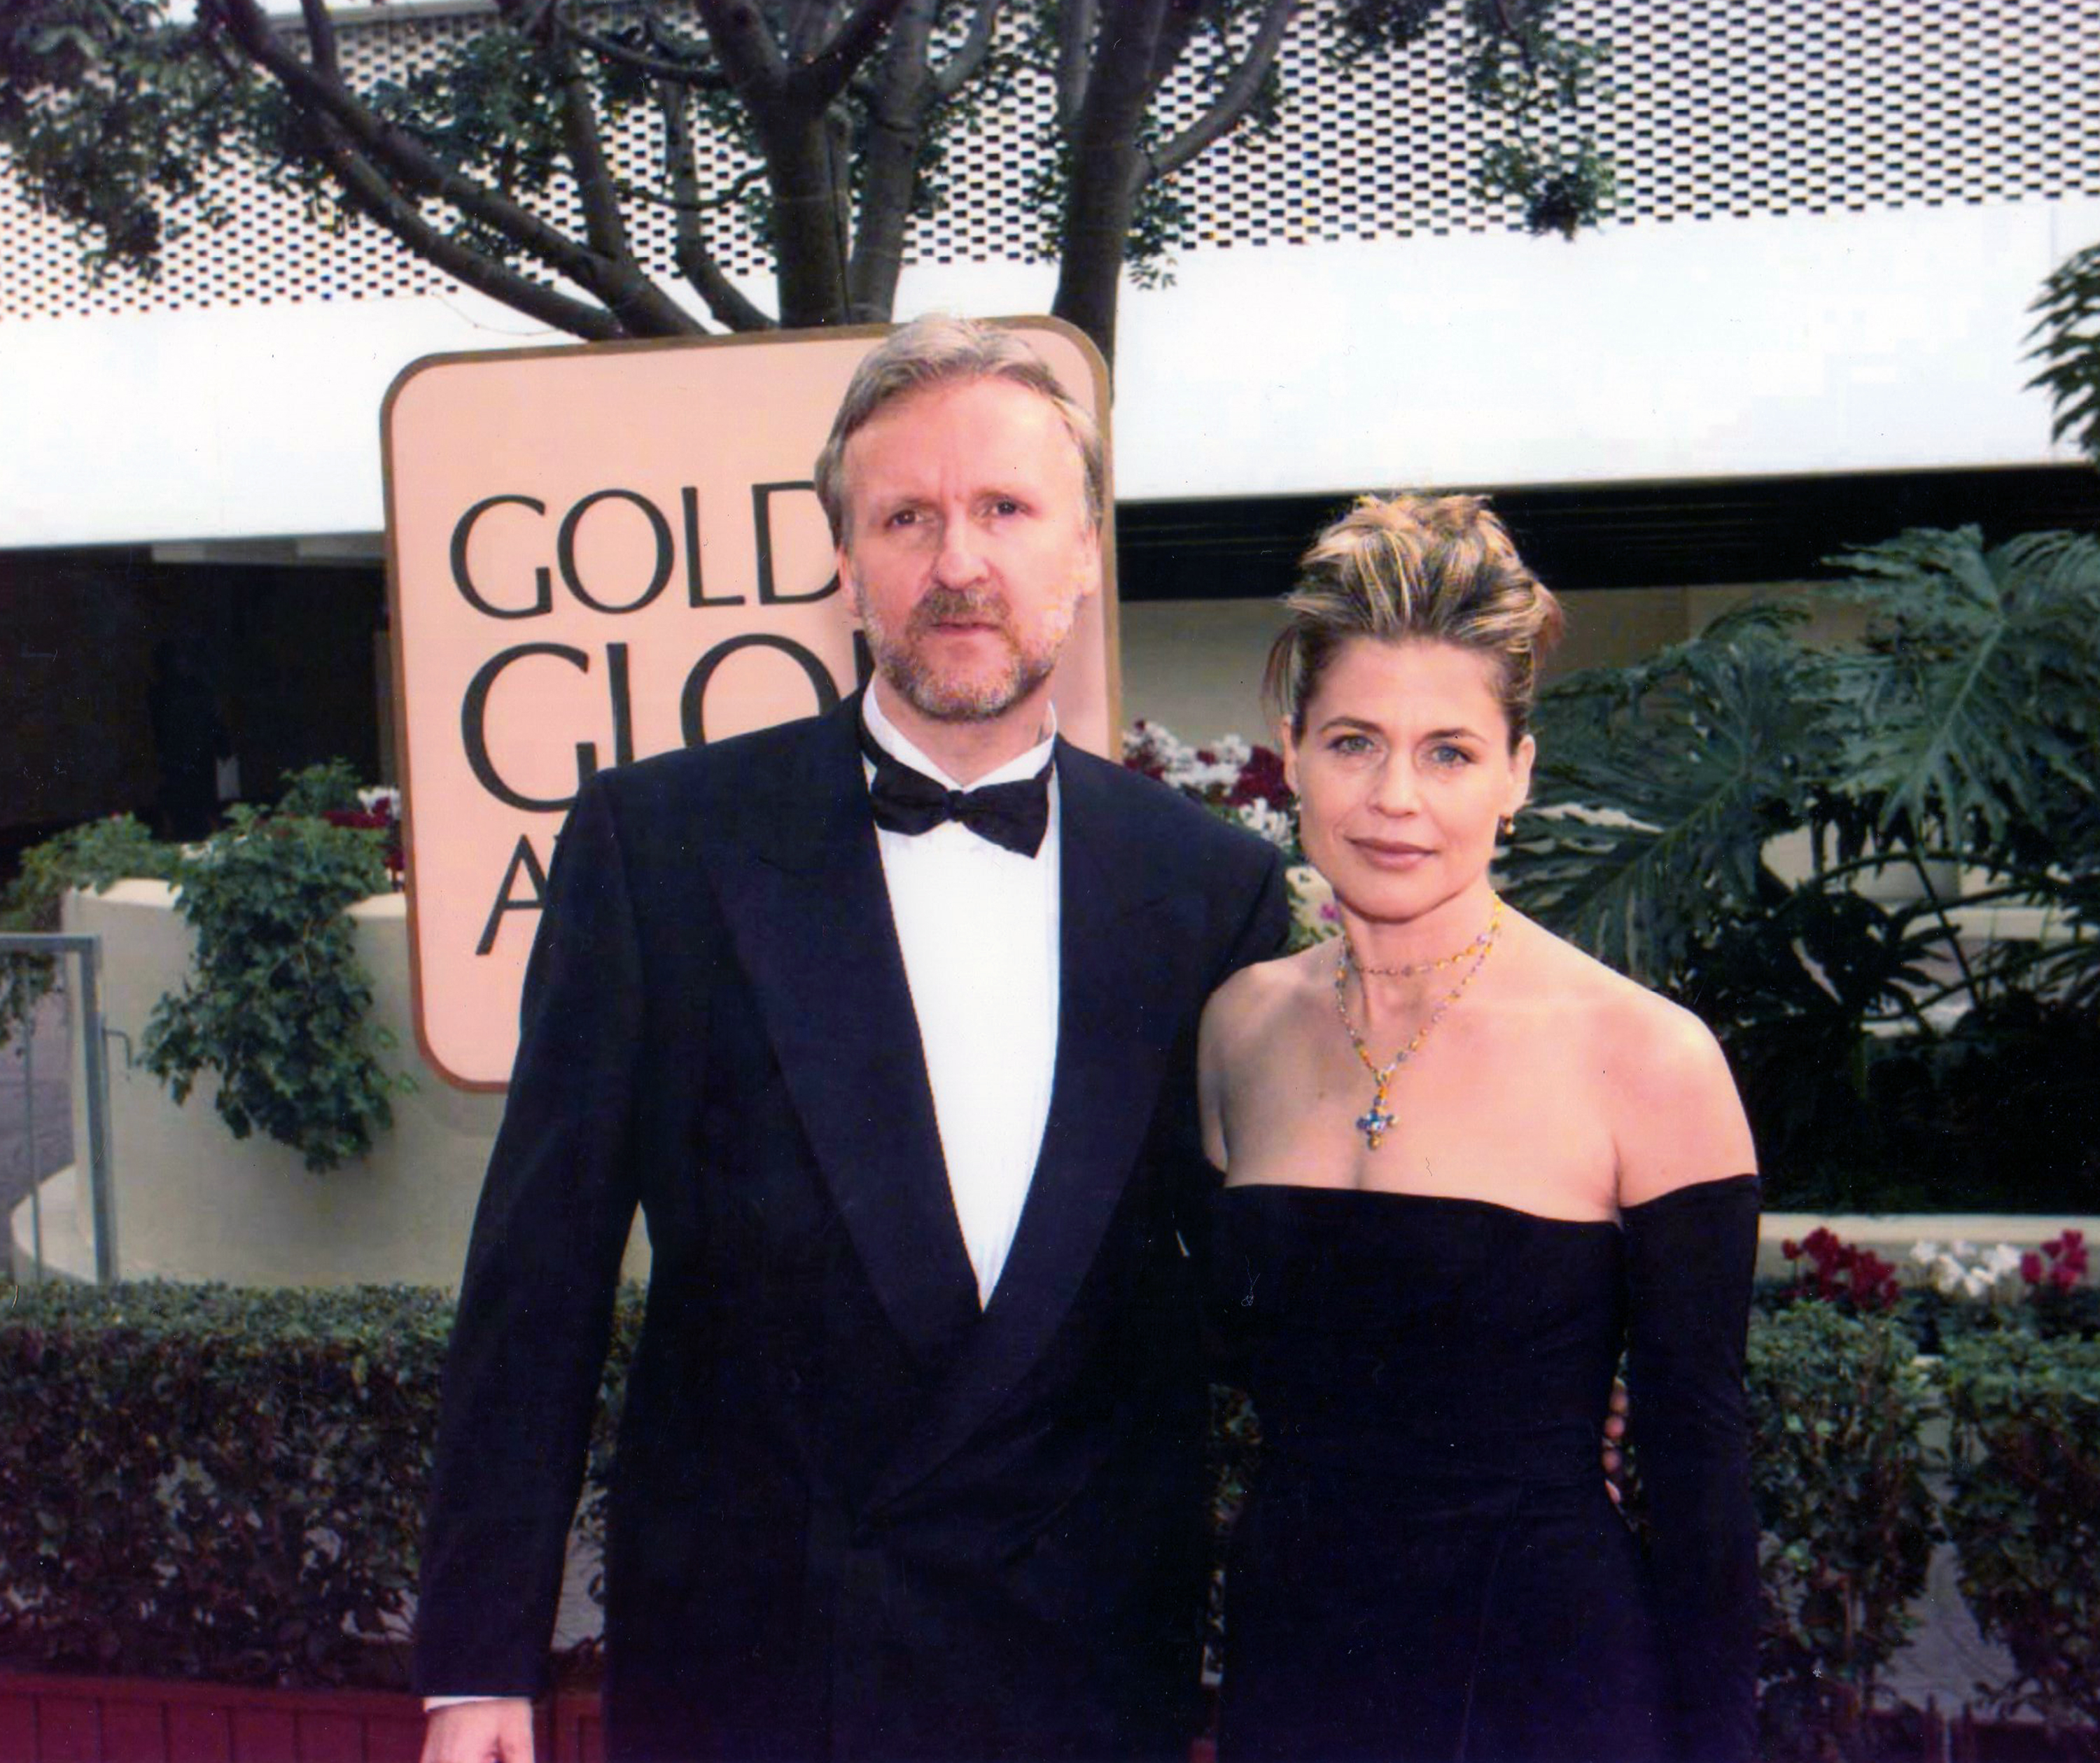 James Cameron and Linda Hamilton on the red carpet